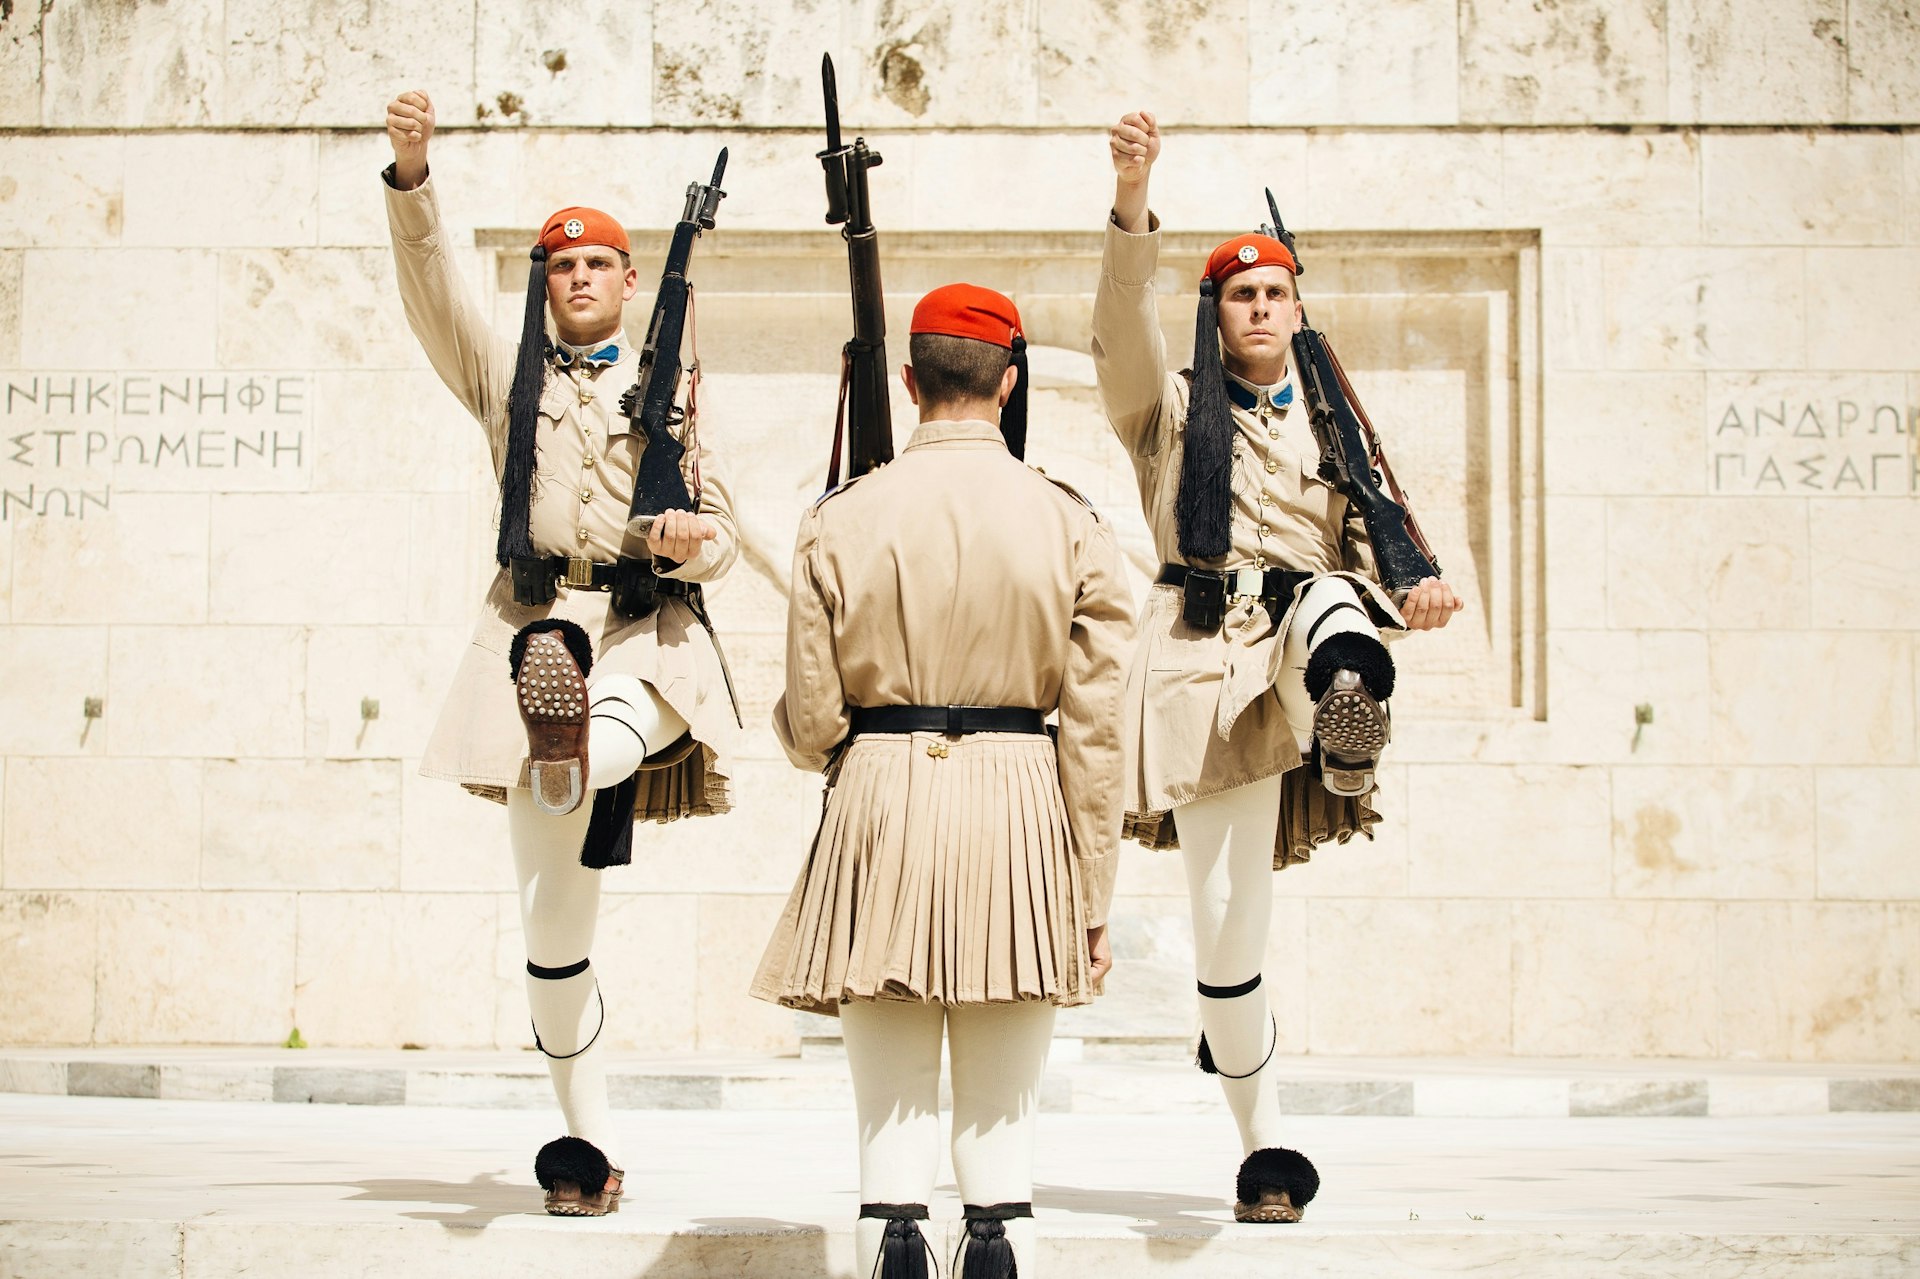 Two guards march towards the camera with their left legs kicked high; another guard has his back to the camera. All are wearing beige uniform with red caps and are armed with large rifles 